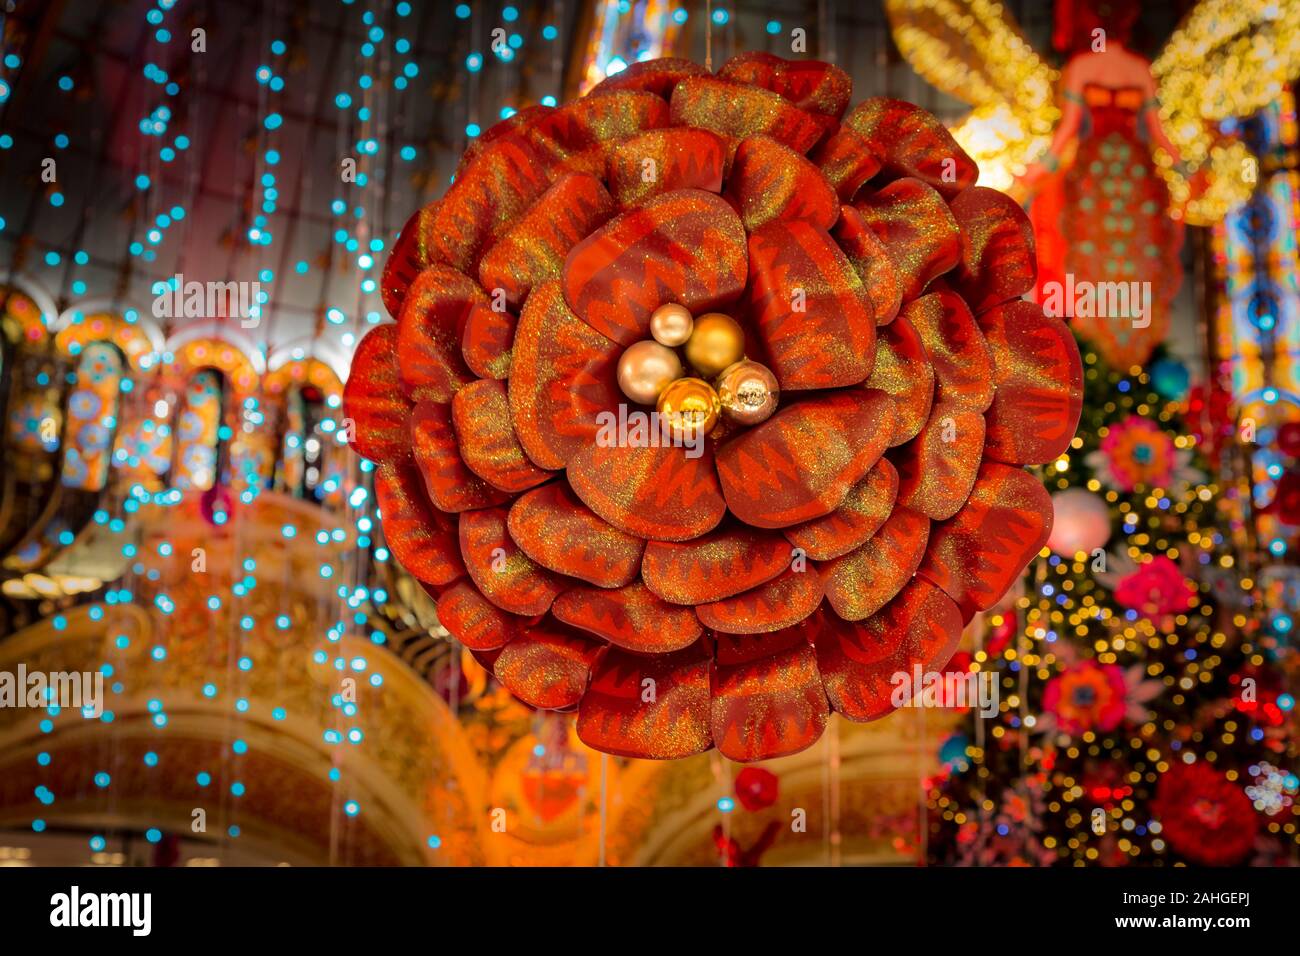 Galleries Lafayette Christmas and new year decorations December 2019 Paris: bees, flowers, mouses. Very colorful Stock Photo